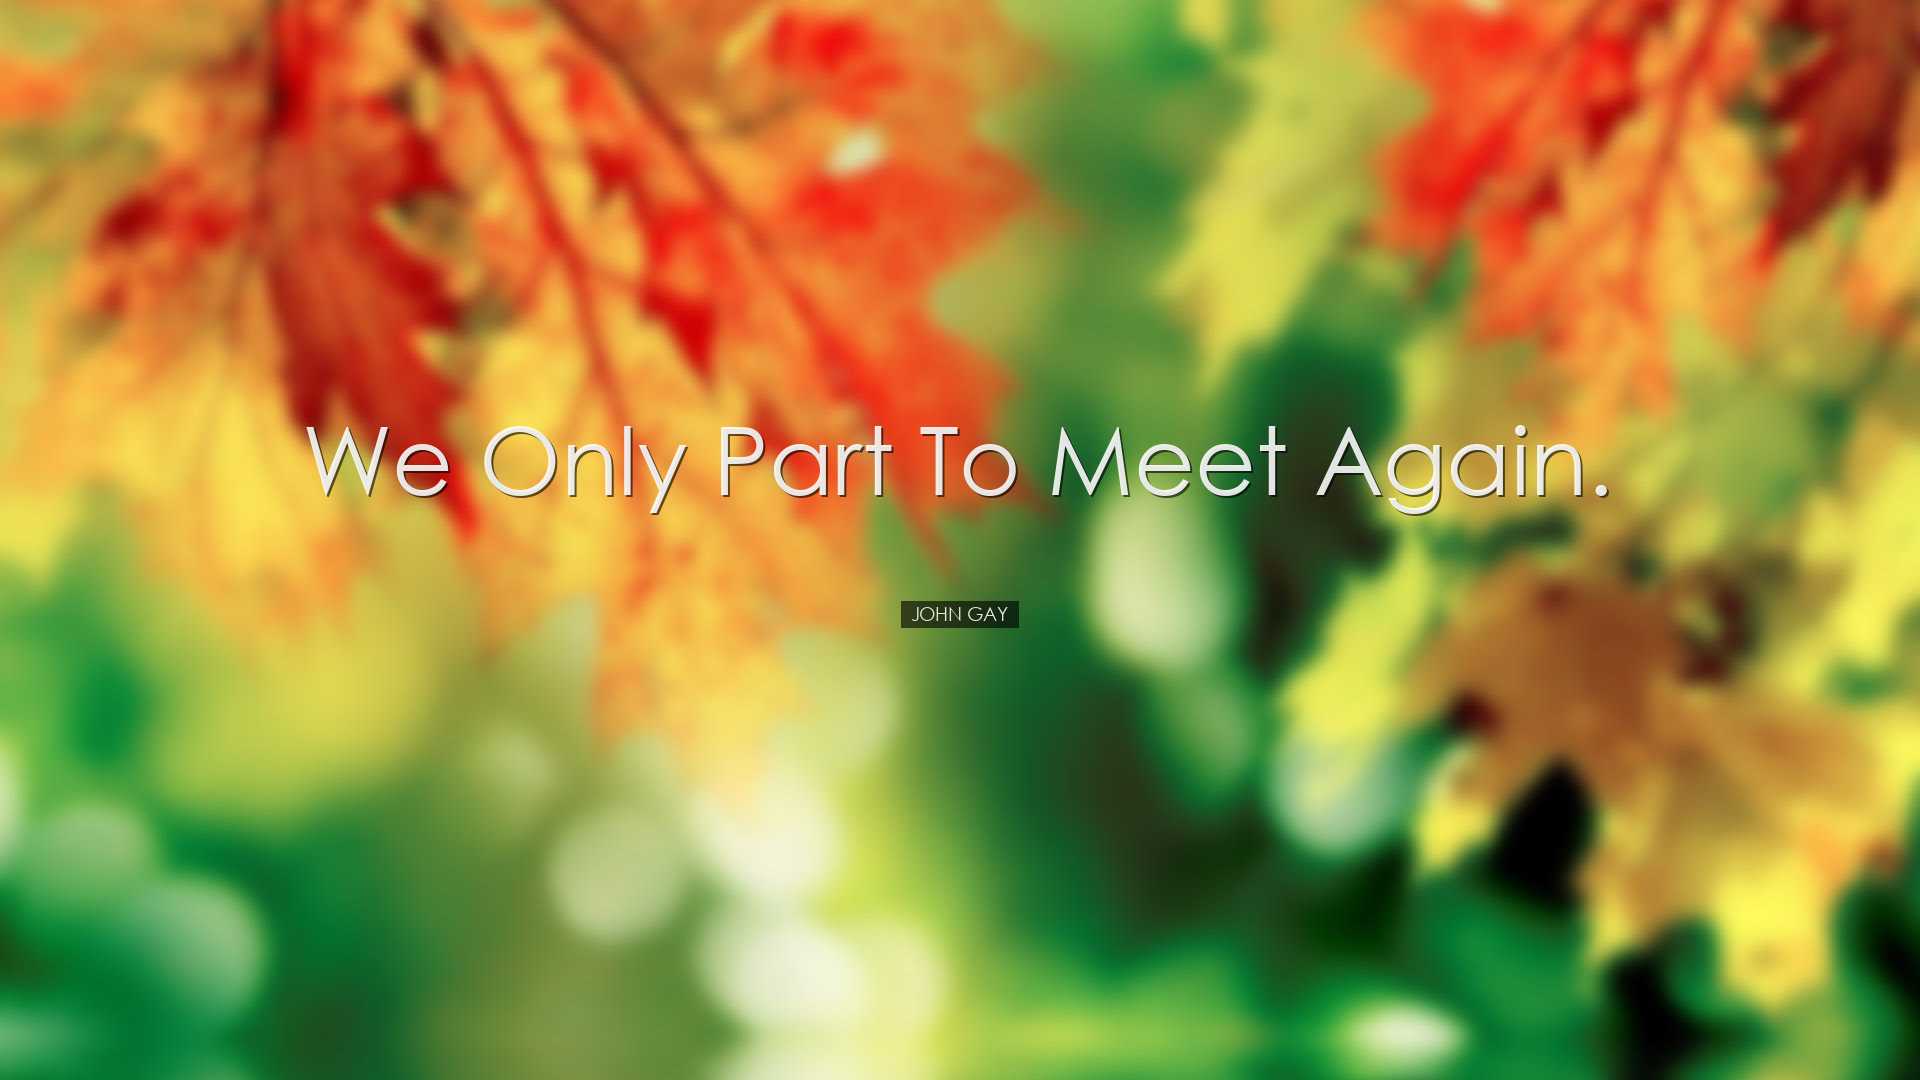 We only part to meet again. - John Gay